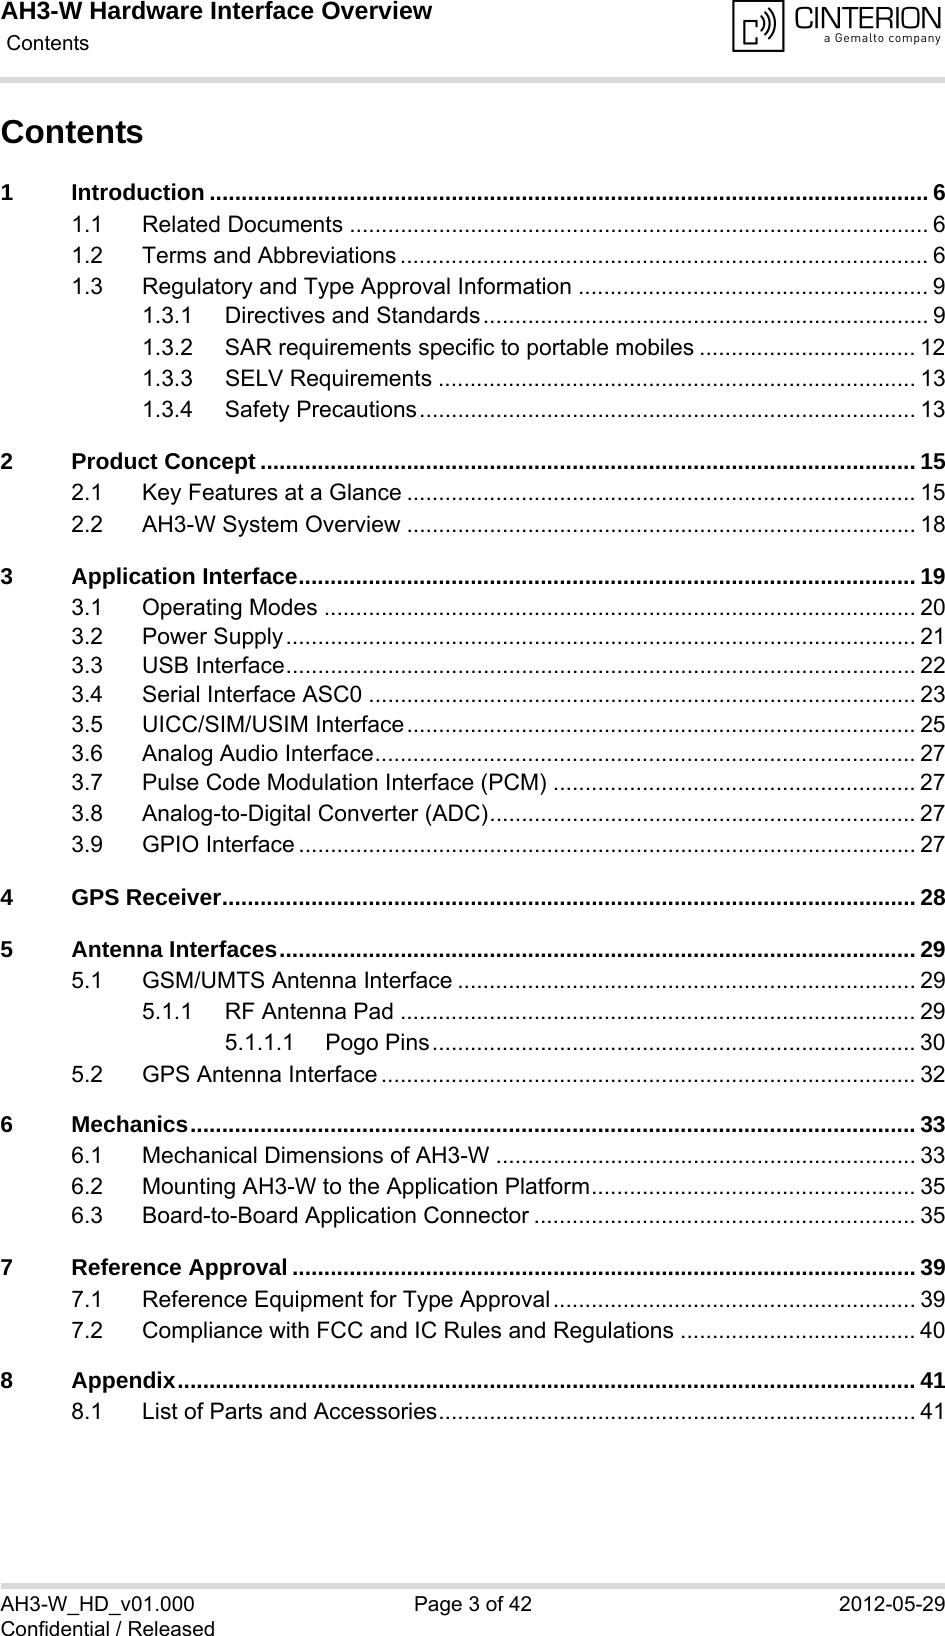 AH3-W Hardware Interface Overview Contents42AH3-W_HD_v01.000 Page 3 of 42 2012-05-29Confidential / ReleasedContents1 Introduction ................................................................................................................. 61.1 Related Documents ........................................................................................... 61.2 Terms and Abbreviations ................................................................................... 61.3 Regulatory and Type Approval Information ....................................................... 91.3.1 Directives and Standards...................................................................... 91.3.2 SAR requirements specific to portable mobiles .................................. 121.3.3 SELV Requirements ........................................................................... 131.3.4 Safety Precautions.............................................................................. 132 Product Concept ....................................................................................................... 152.1 Key Features at a Glance ................................................................................ 152.2 AH3-W System Overview ................................................................................ 183 Application Interface................................................................................................. 193.1 Operating Modes ............................................................................................. 203.2 Power Supply................................................................................................... 213.3 USB Interface................................................................................................... 223.4 Serial Interface ASC0 ...................................................................................... 233.5 UICC/SIM/USIM Interface................................................................................ 253.6 Analog Audio Interface..................................................................................... 273.7 Pulse Code Modulation Interface (PCM) ......................................................... 273.8 Analog-to-Digital Converter (ADC)................................................................... 273.9 GPIO Interface ................................................................................................. 274 GPS Receiver............................................................................................................. 285 Antenna Interfaces.................................................................................................... 295.1 GSM/UMTS Antenna Interface ........................................................................ 295.1.1 RF Antenna Pad ................................................................................. 295.1.1.1 Pogo Pins............................................................................ 305.2 GPS Antenna Interface .................................................................................... 326 Mechanics.................................................................................................................. 336.1 Mechanical Dimensions of AH3-W .................................................................. 336.2 Mounting AH3-W to the Application Platform................................................... 356.3 Board-to-Board Application Connector ............................................................ 357 Reference Approval .................................................................................................. 397.1 Reference Equipment for Type Approval......................................................... 397.2 Compliance with FCC and IC Rules and Regulations ..................................... 408 Appendix.................................................................................................................... 418.1 List of Parts and Accessories........................................................................... 41